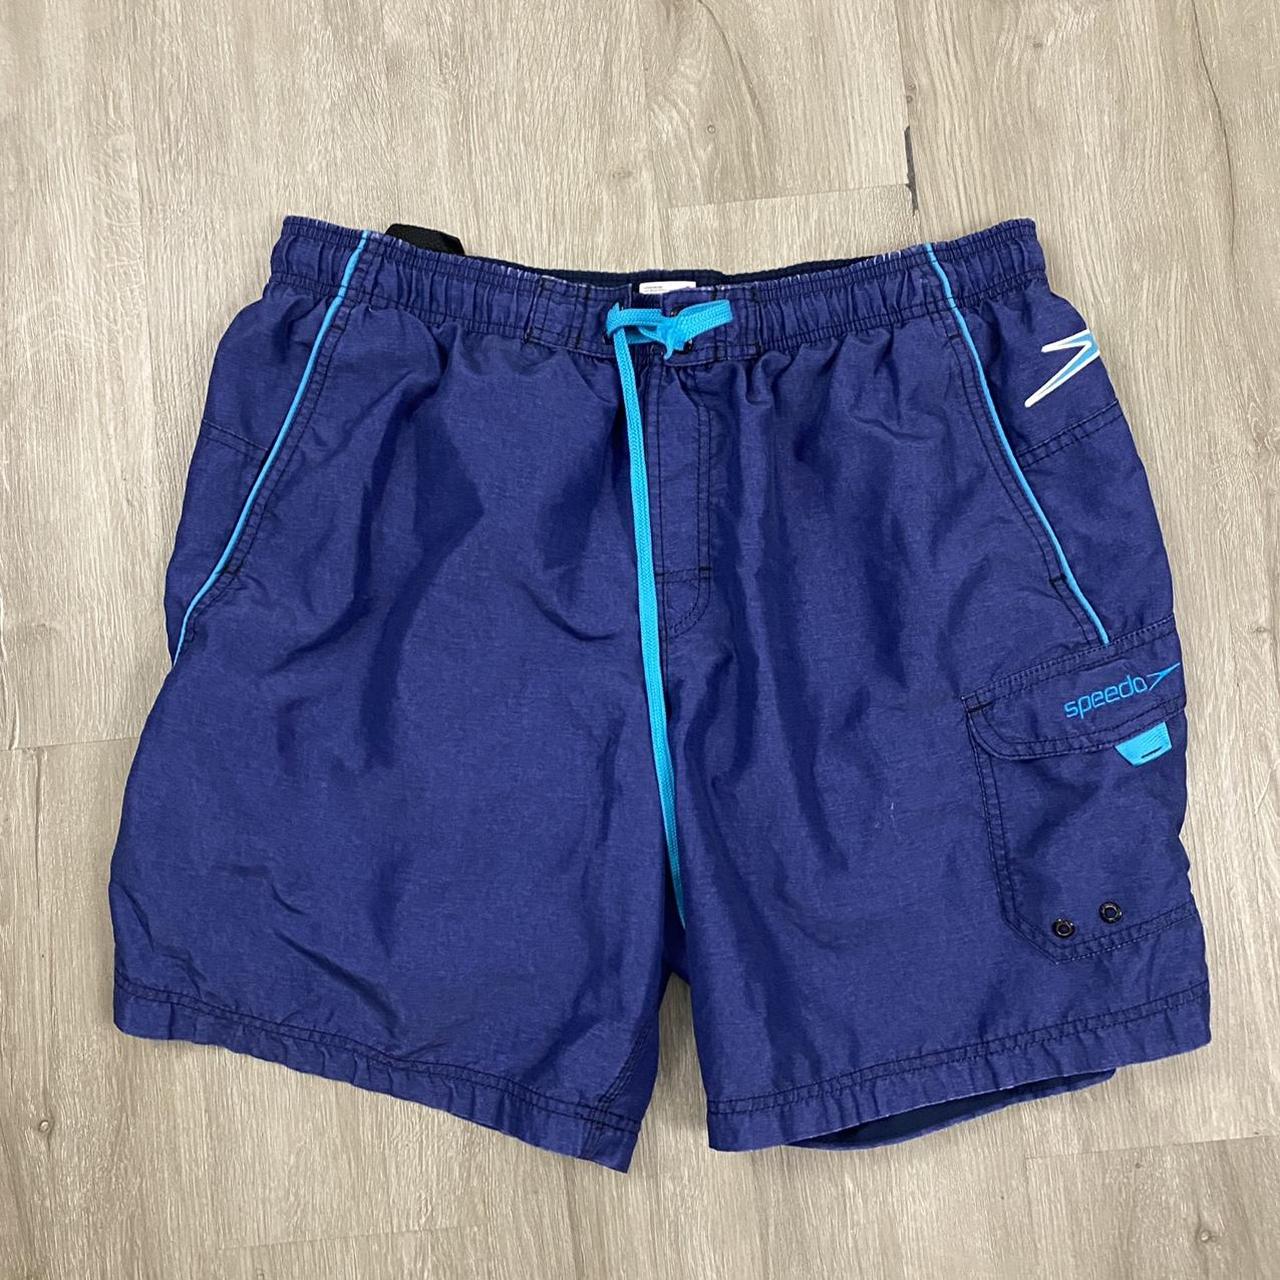 Product Image 1 - Vintage speedo shorts 
In great